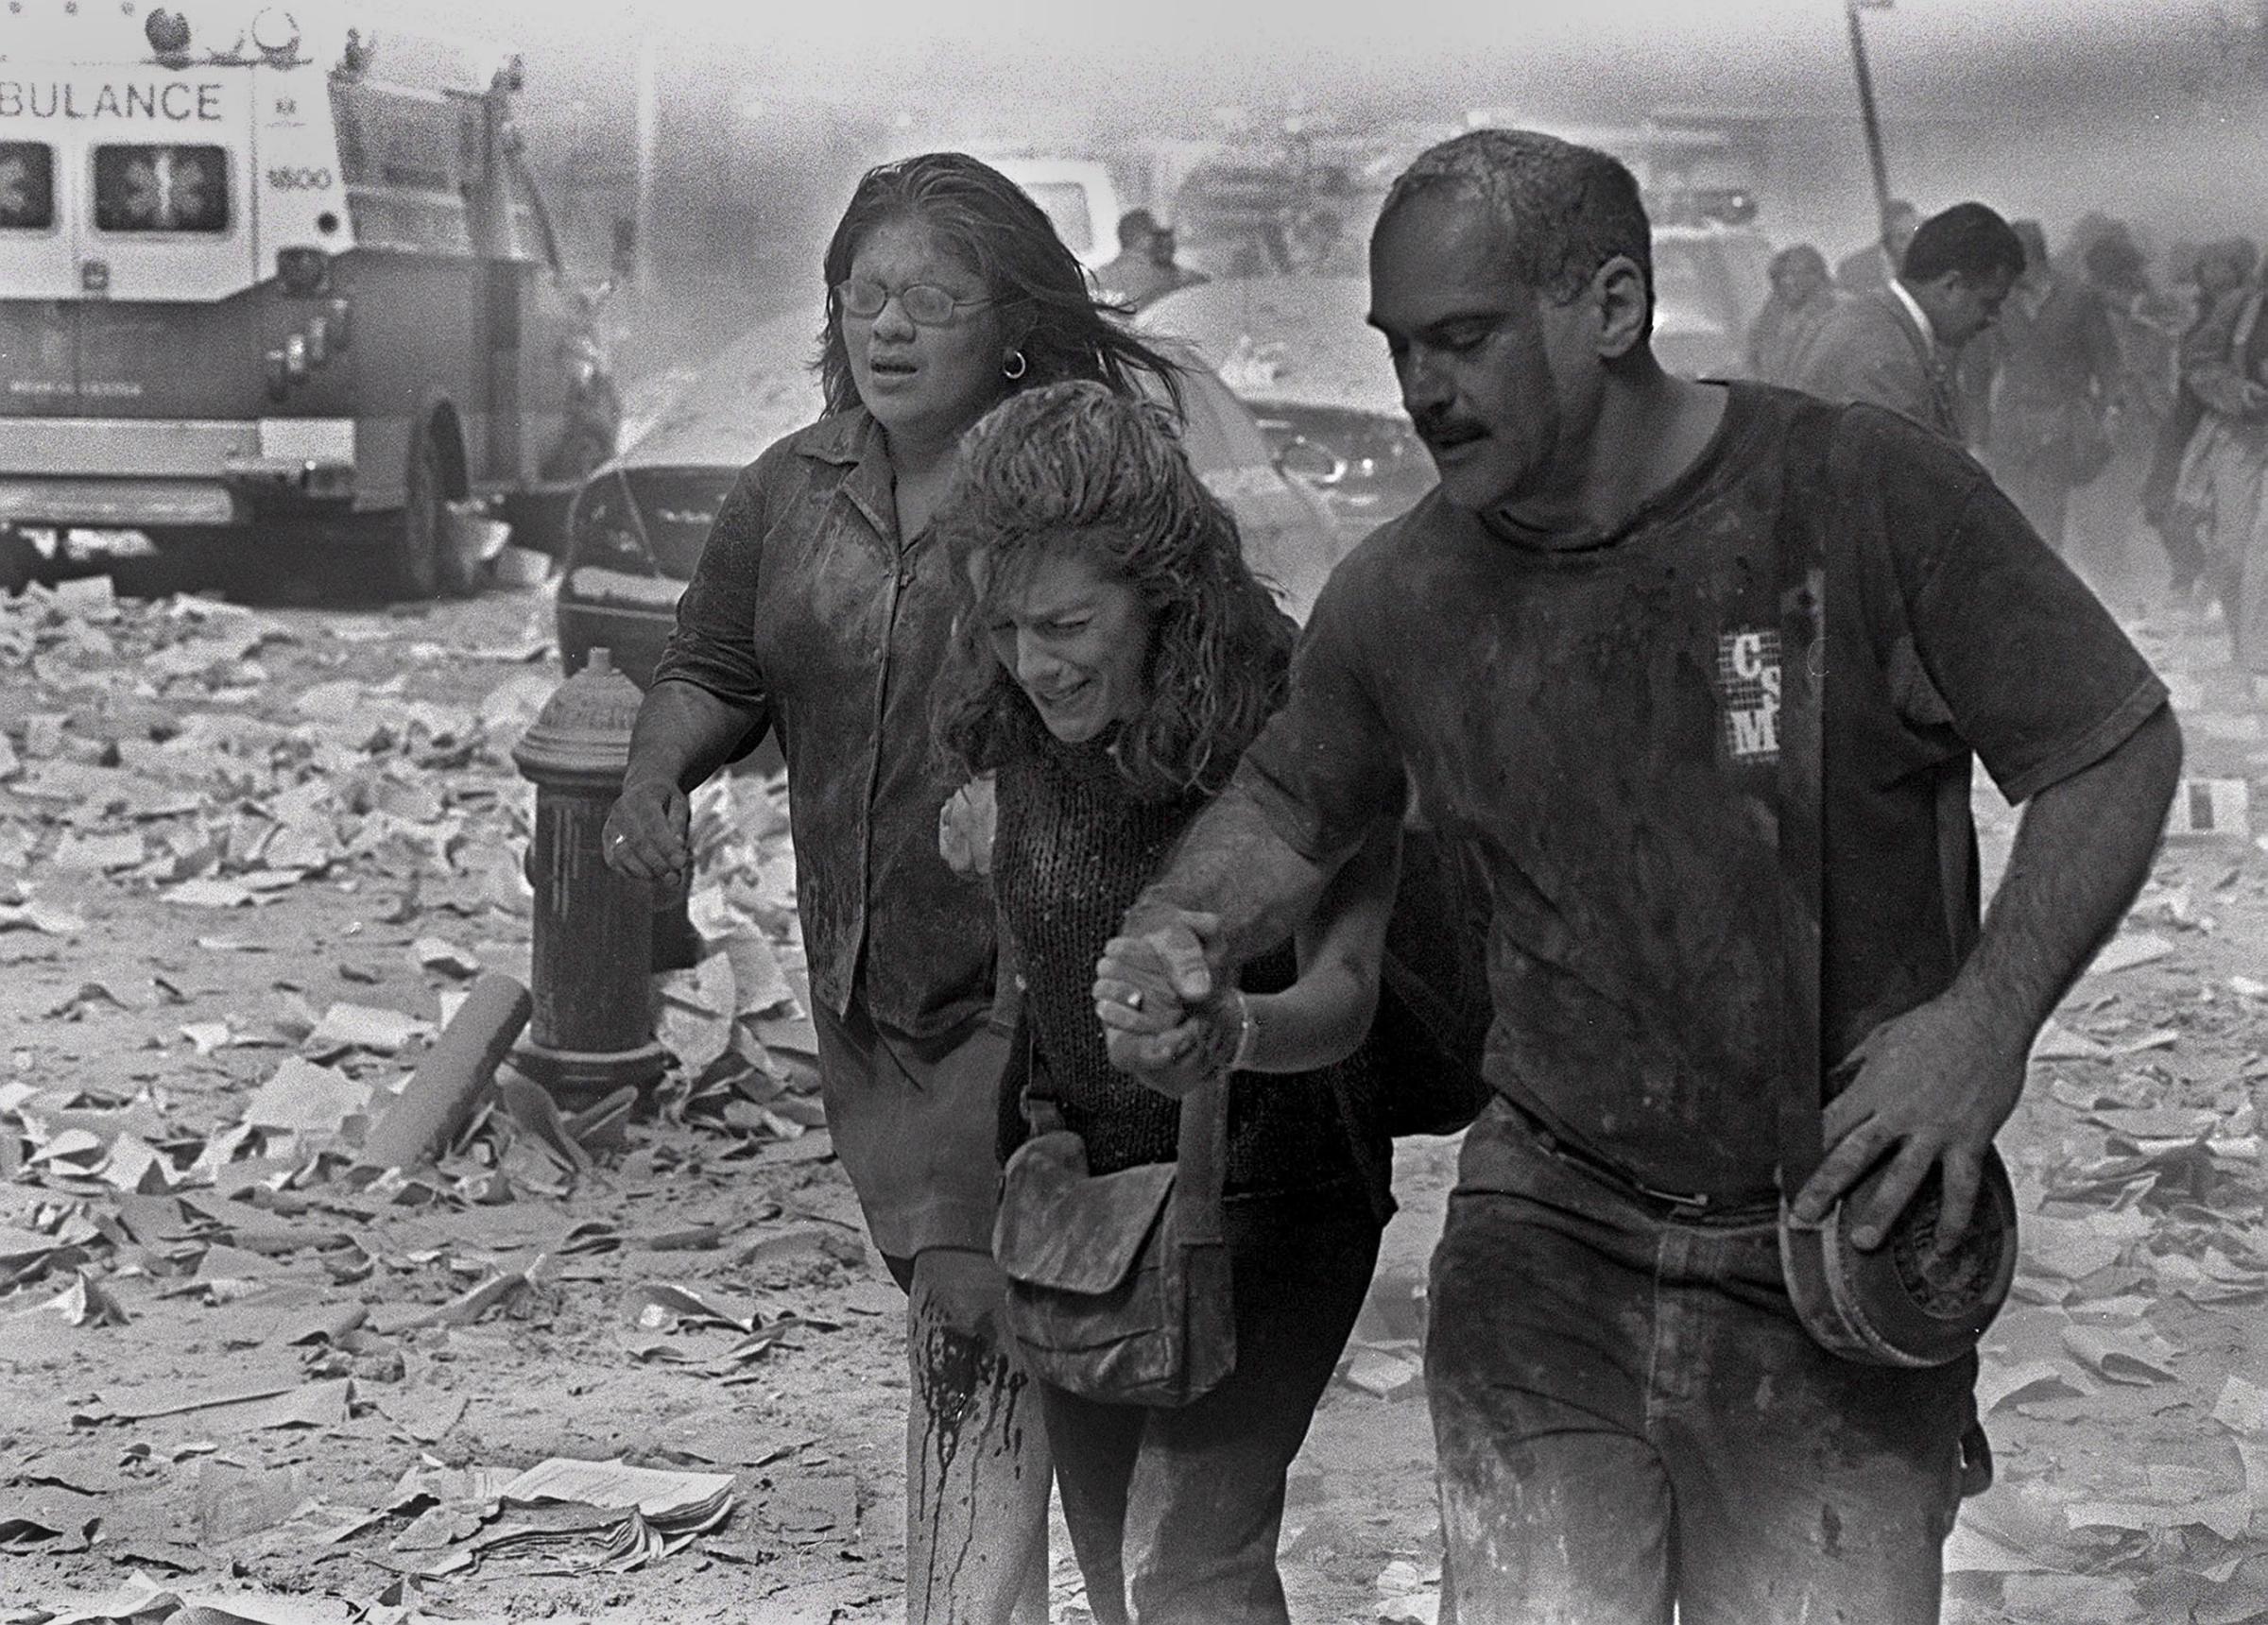 Julie McDermott, center, walks with other victims as they make their way amid debris near the World Trade Center in New York City on Sept. 11, 2001.